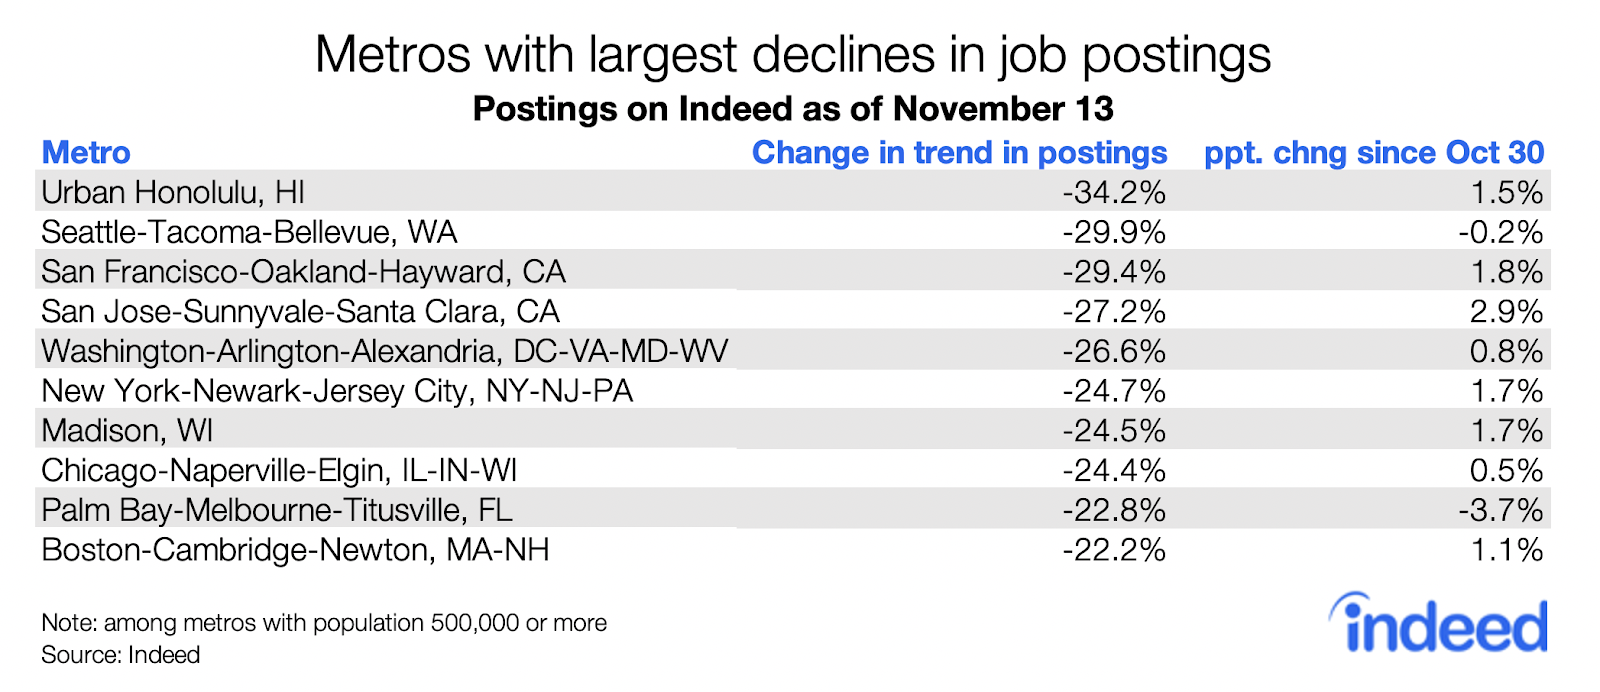 Table showing metros with the largest declines in job postings